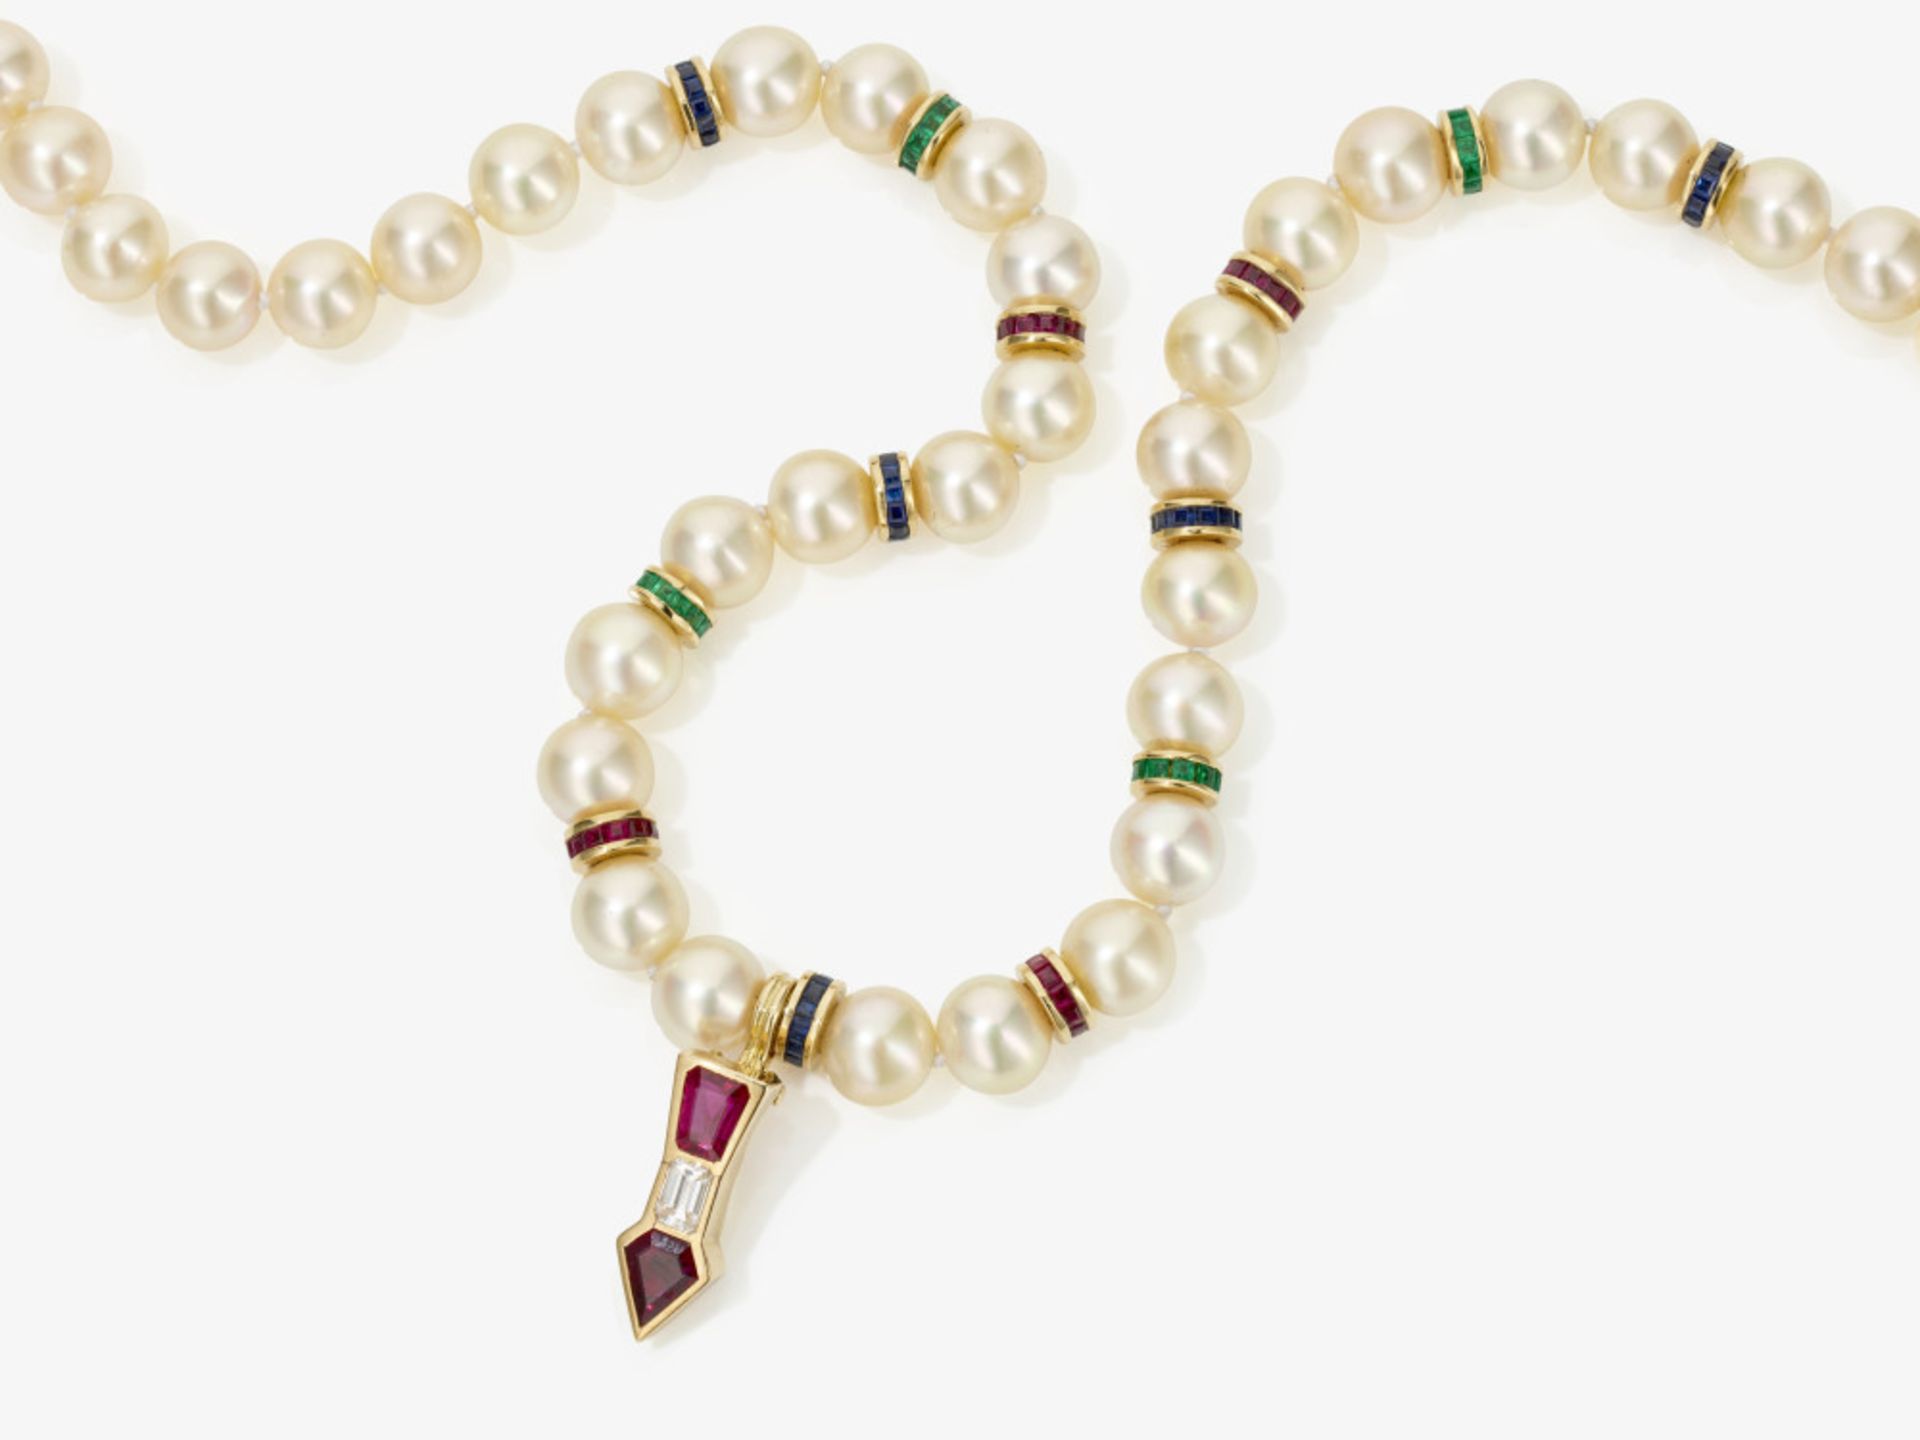 A cultured pearl necklace with a pendant with sapphires, emeralds, rubies and a diamond